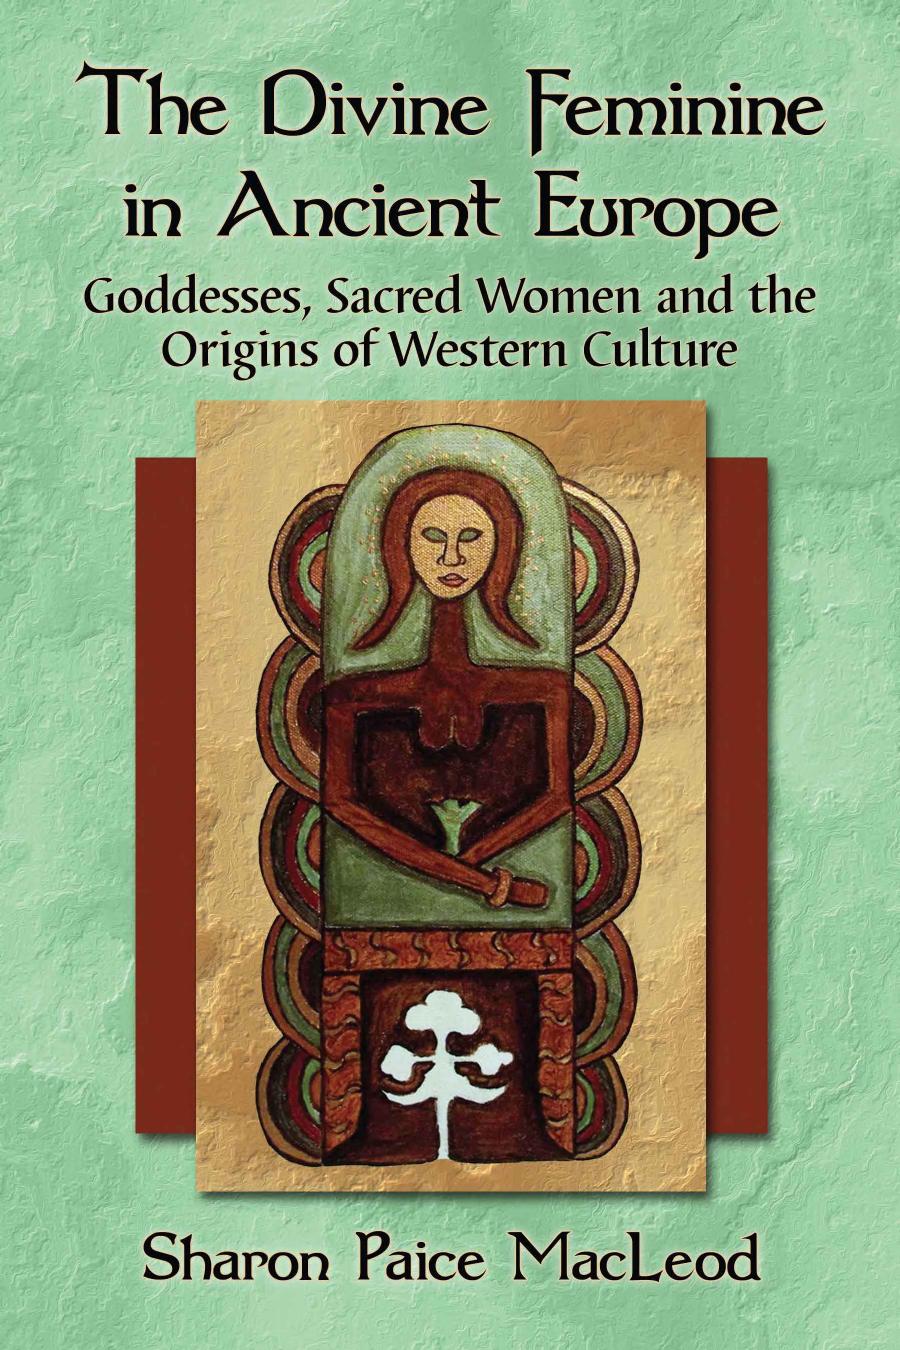 The Divine Feminine in Ancient Europe: Goddesses, Sacred Women and the Origins of Western Culture